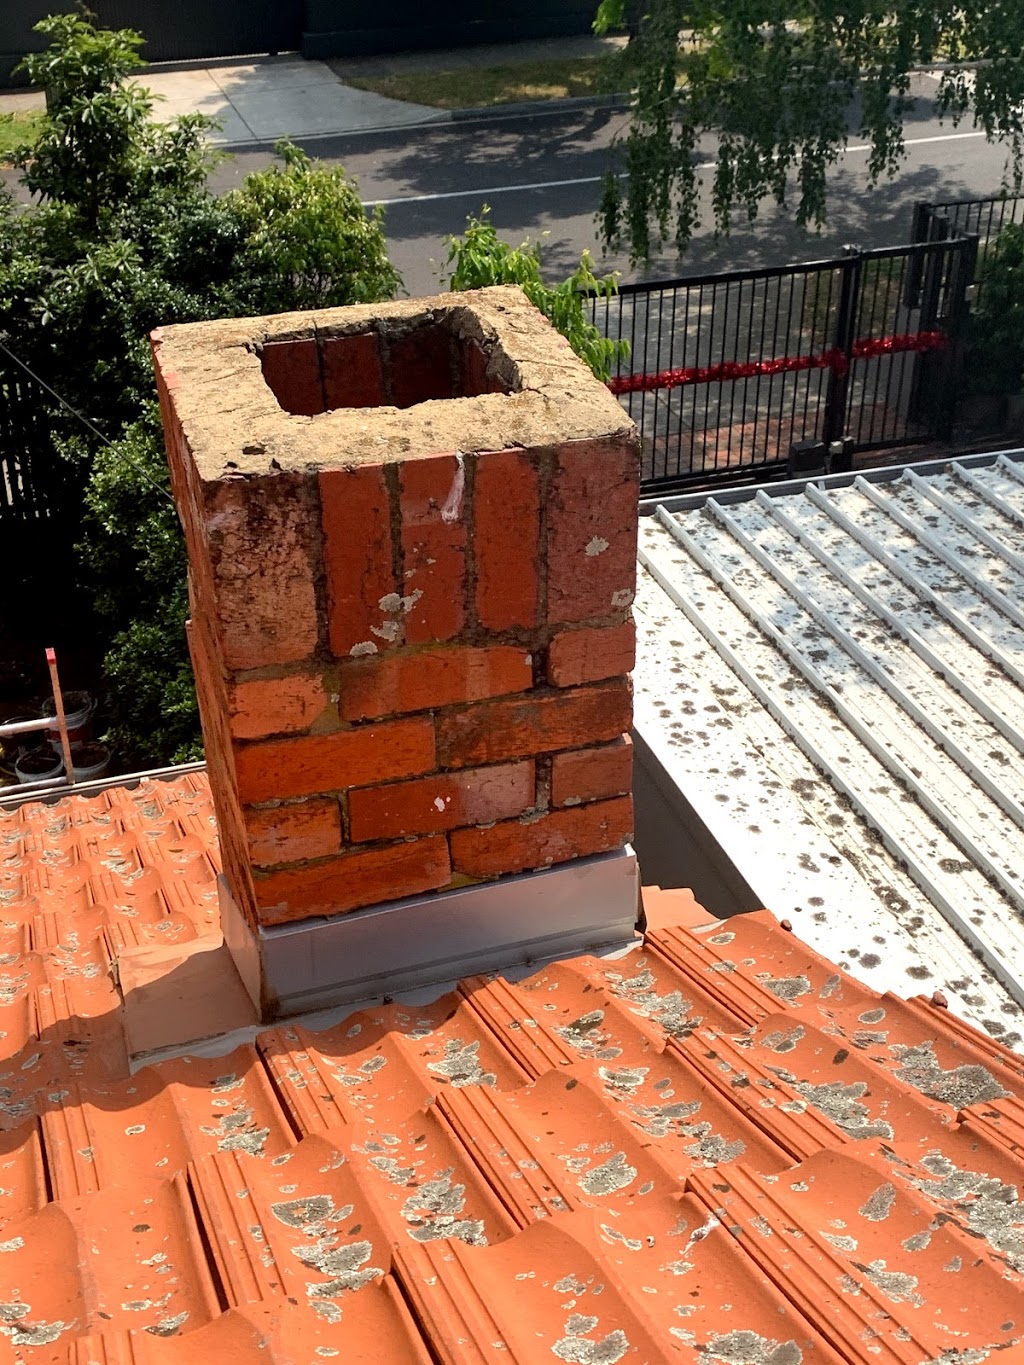 Hallmark Roofing & Home Solutions ,Roof Repair, Leaking Roof Rep | 42-58 Nelson St, Ringwood VIC 3134, Australia | Phone: 1800 849 119